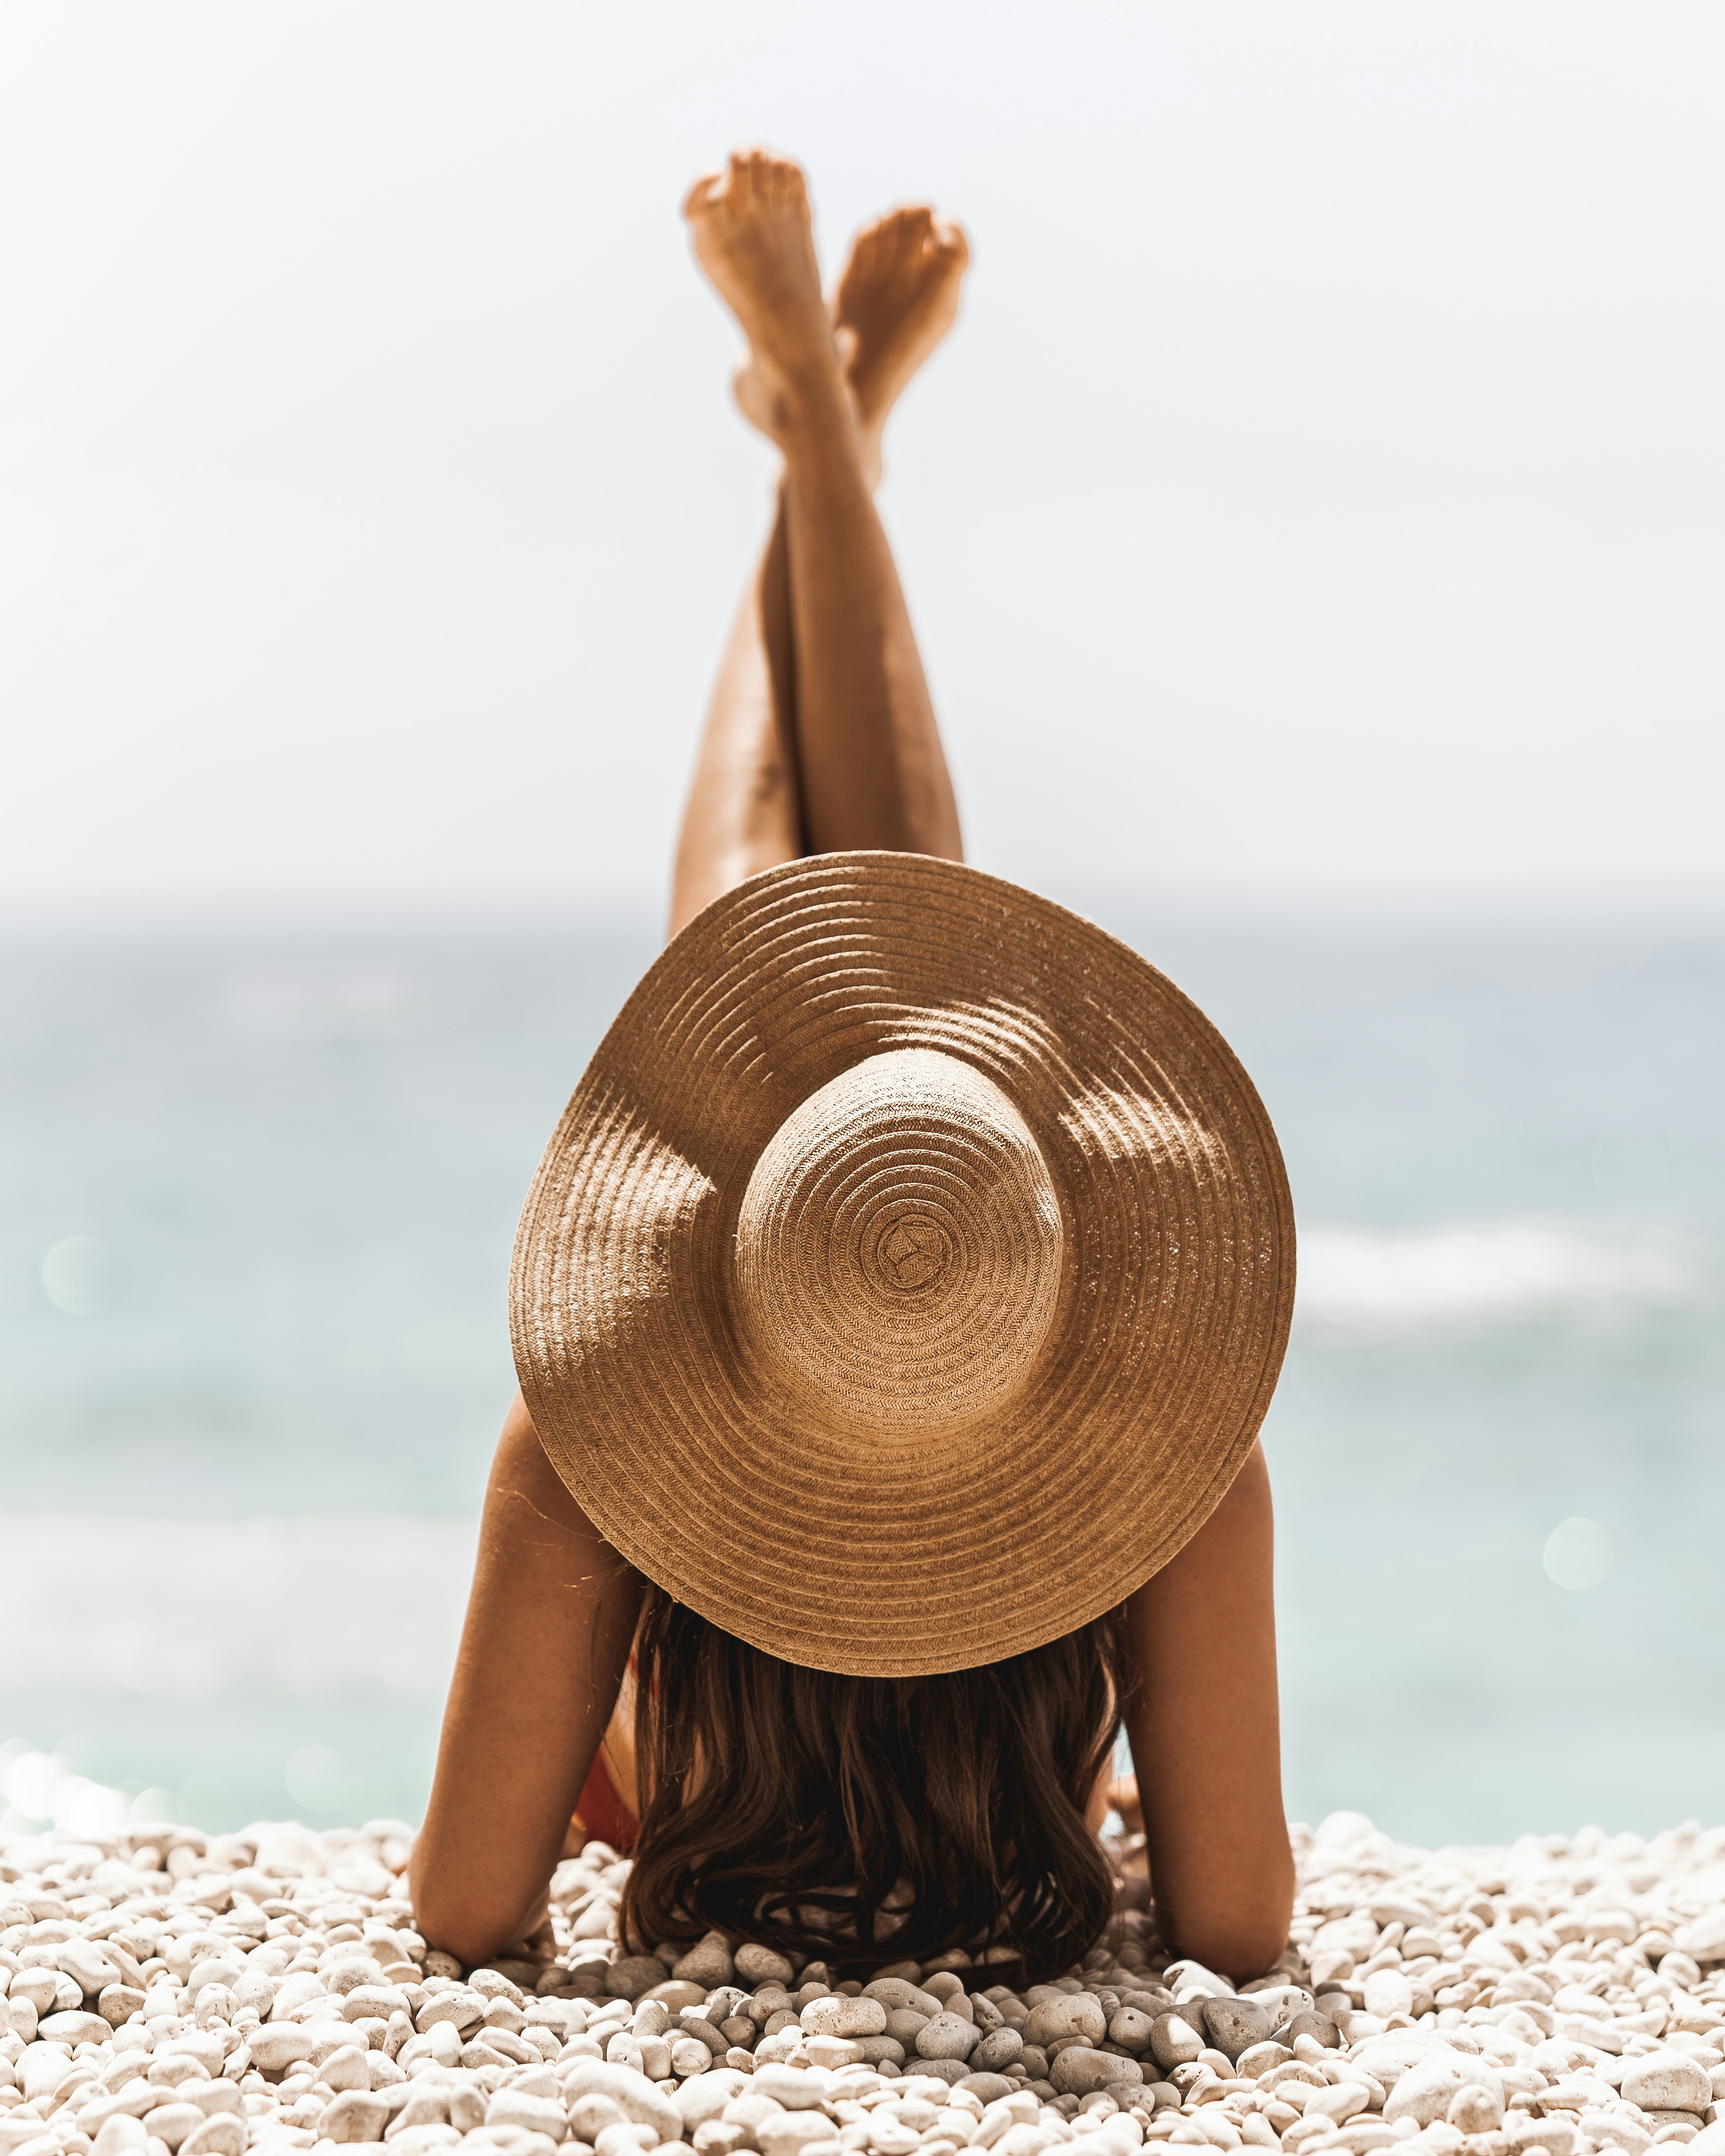 500+ Woman Beach Pictures Download Free Images on Unsplash